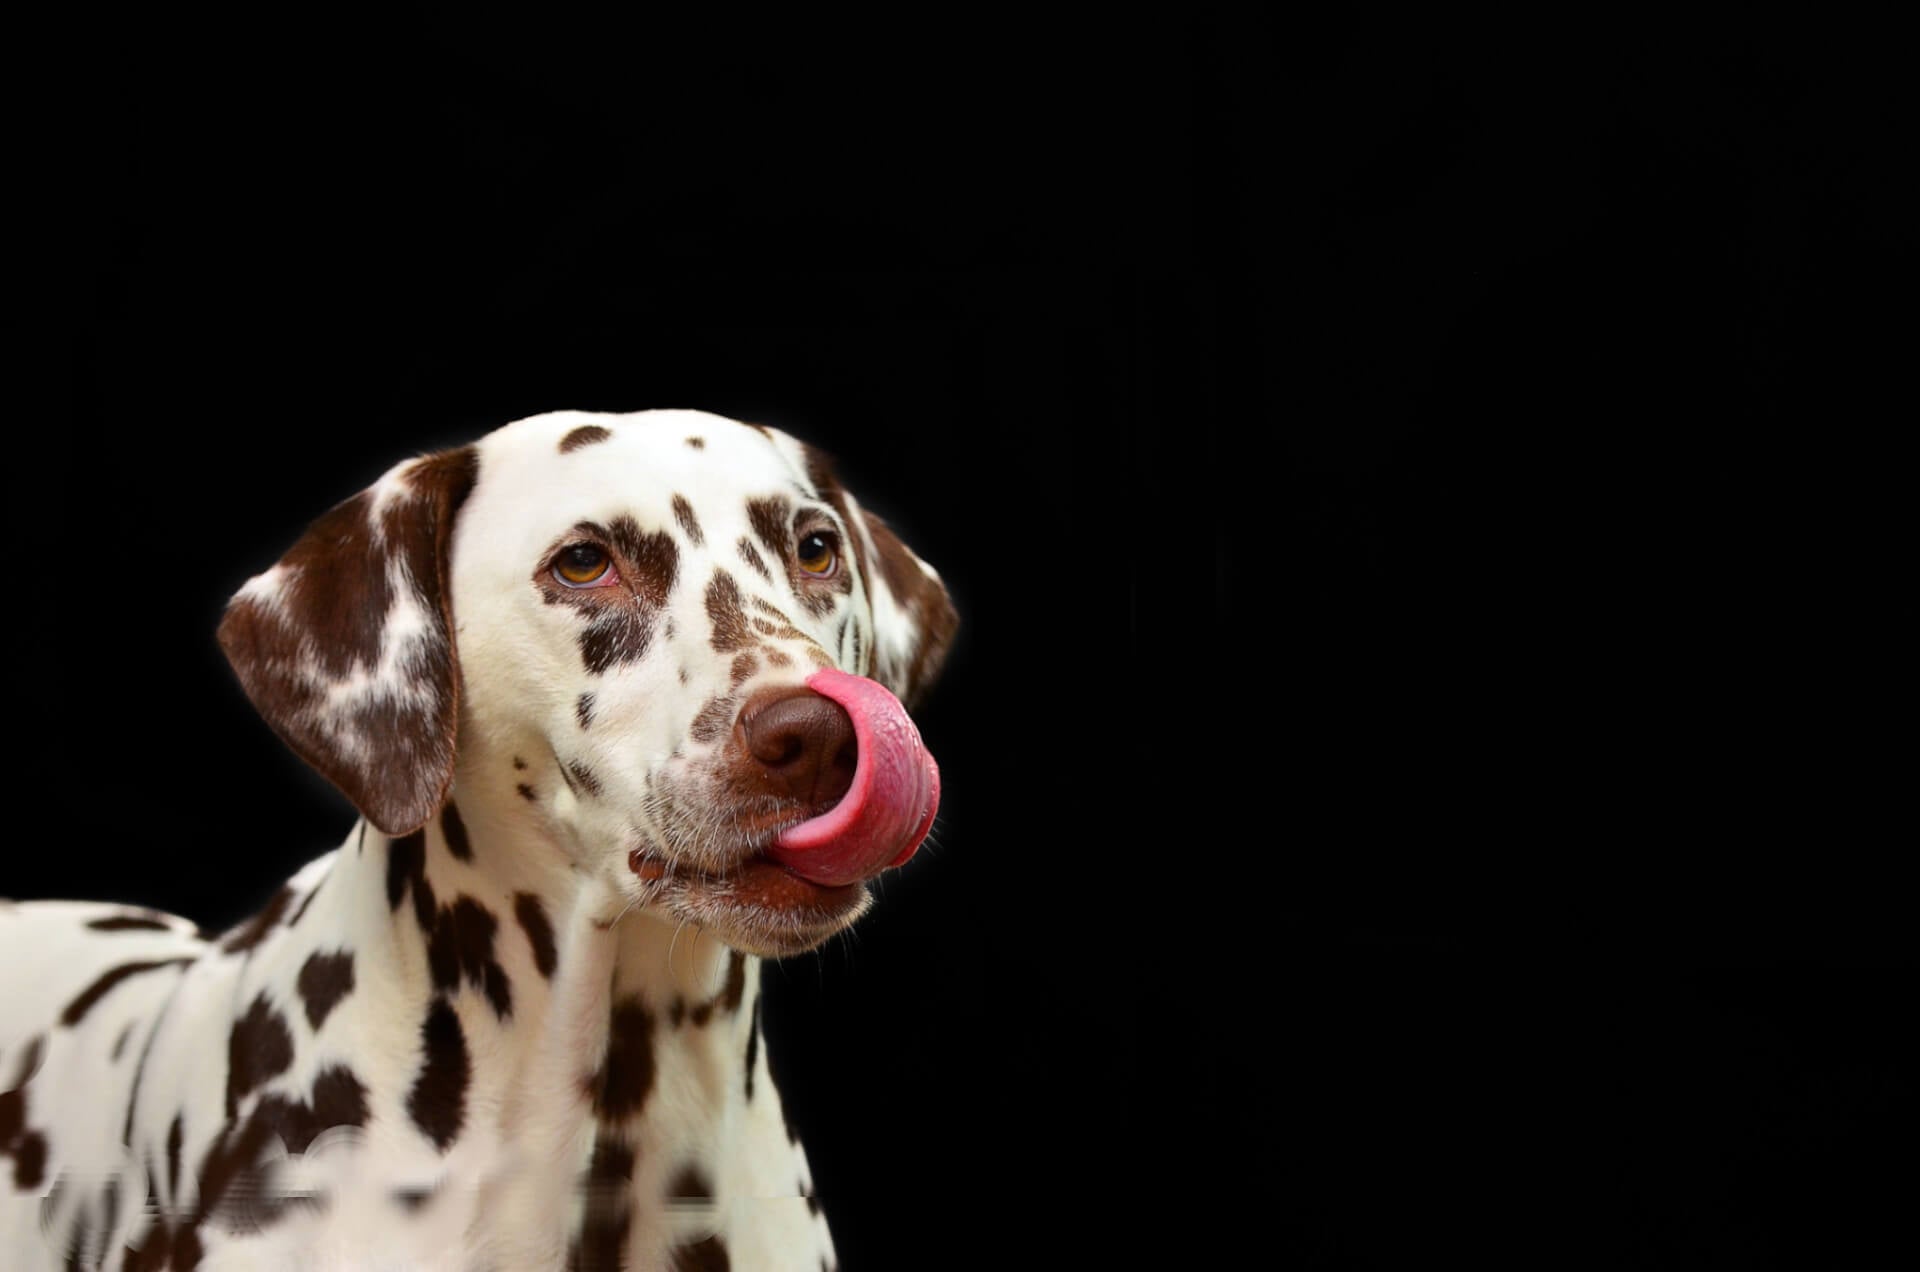 dalmatian-dog-licking-mouth-image-with-text-long-lasting-chews-dog-bones